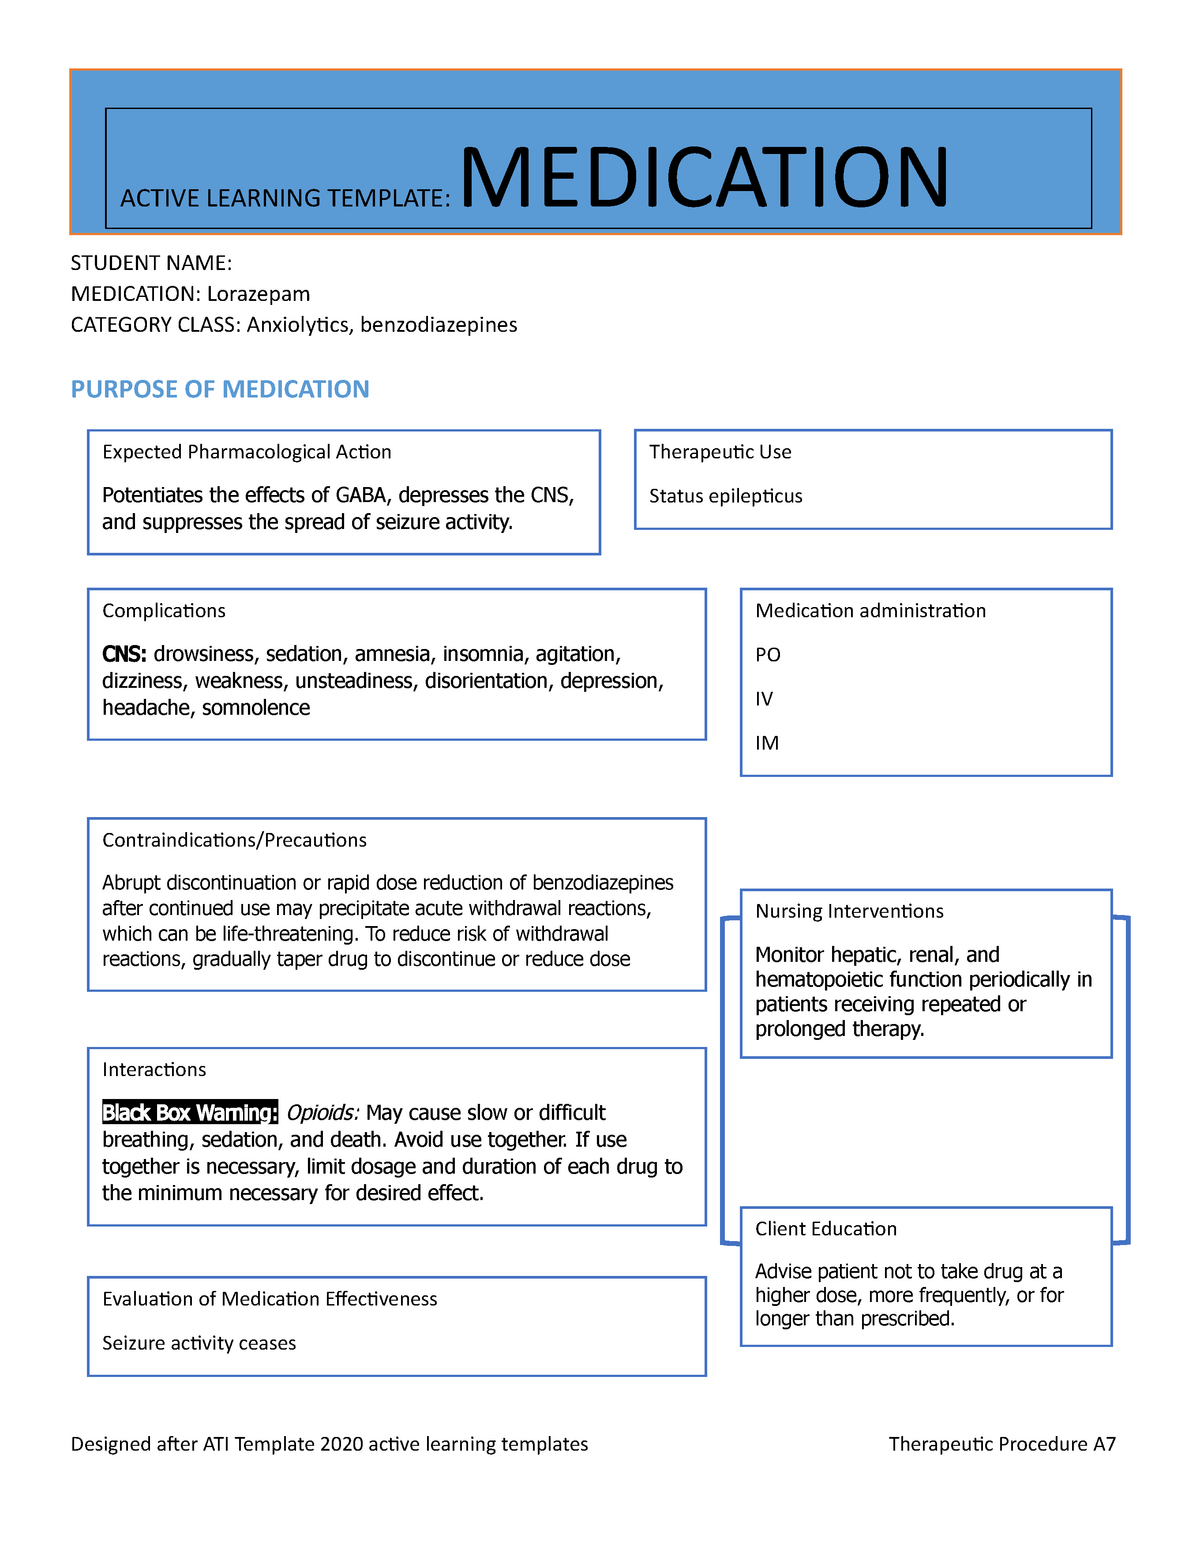 Med lorazepam template STUDENT NAME: MEDICATION: Lorazepam CATEGORY